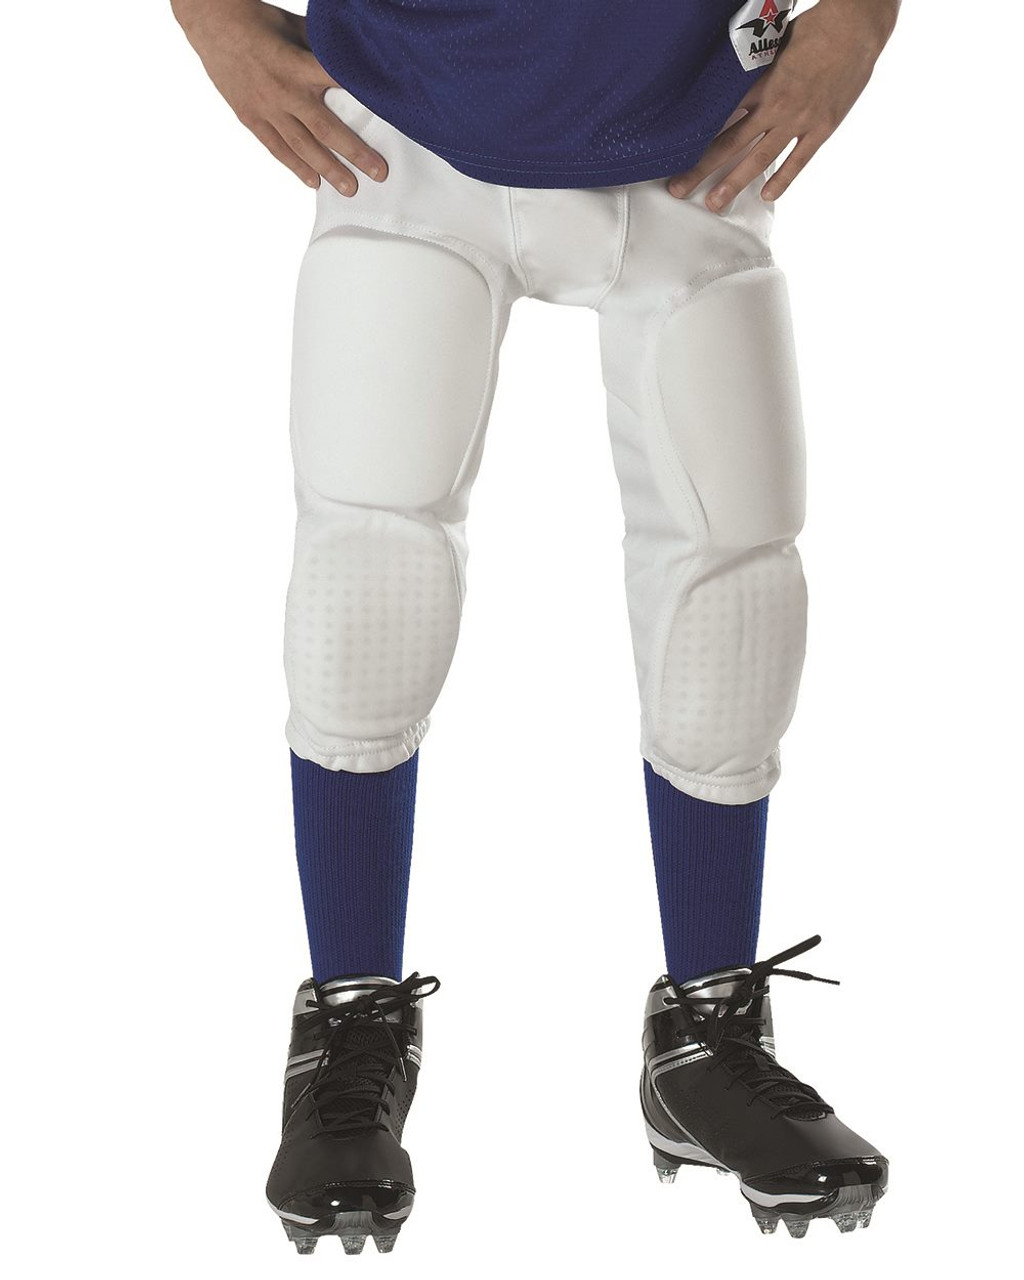 Embroidered Solo Football Pants - 687P